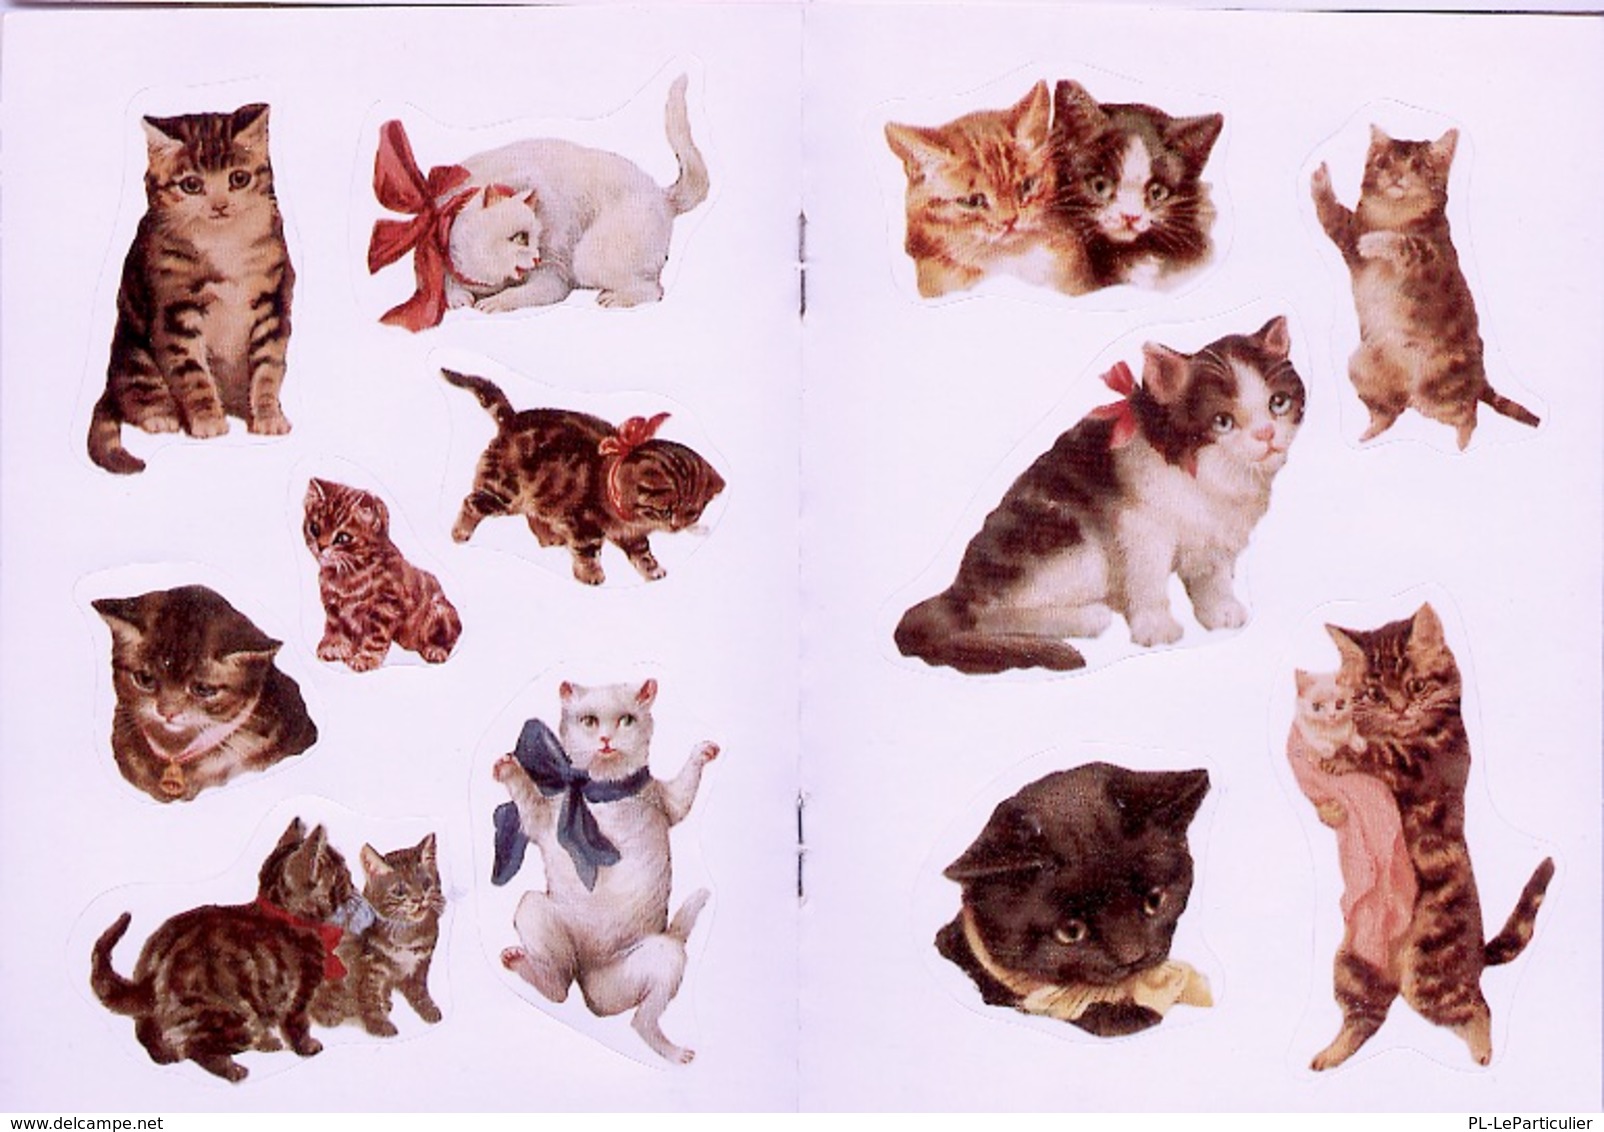 Old Time Cats Stickers By Carol Belanger Grafton Dover USA (autocollants) - Activity/ Colouring Books